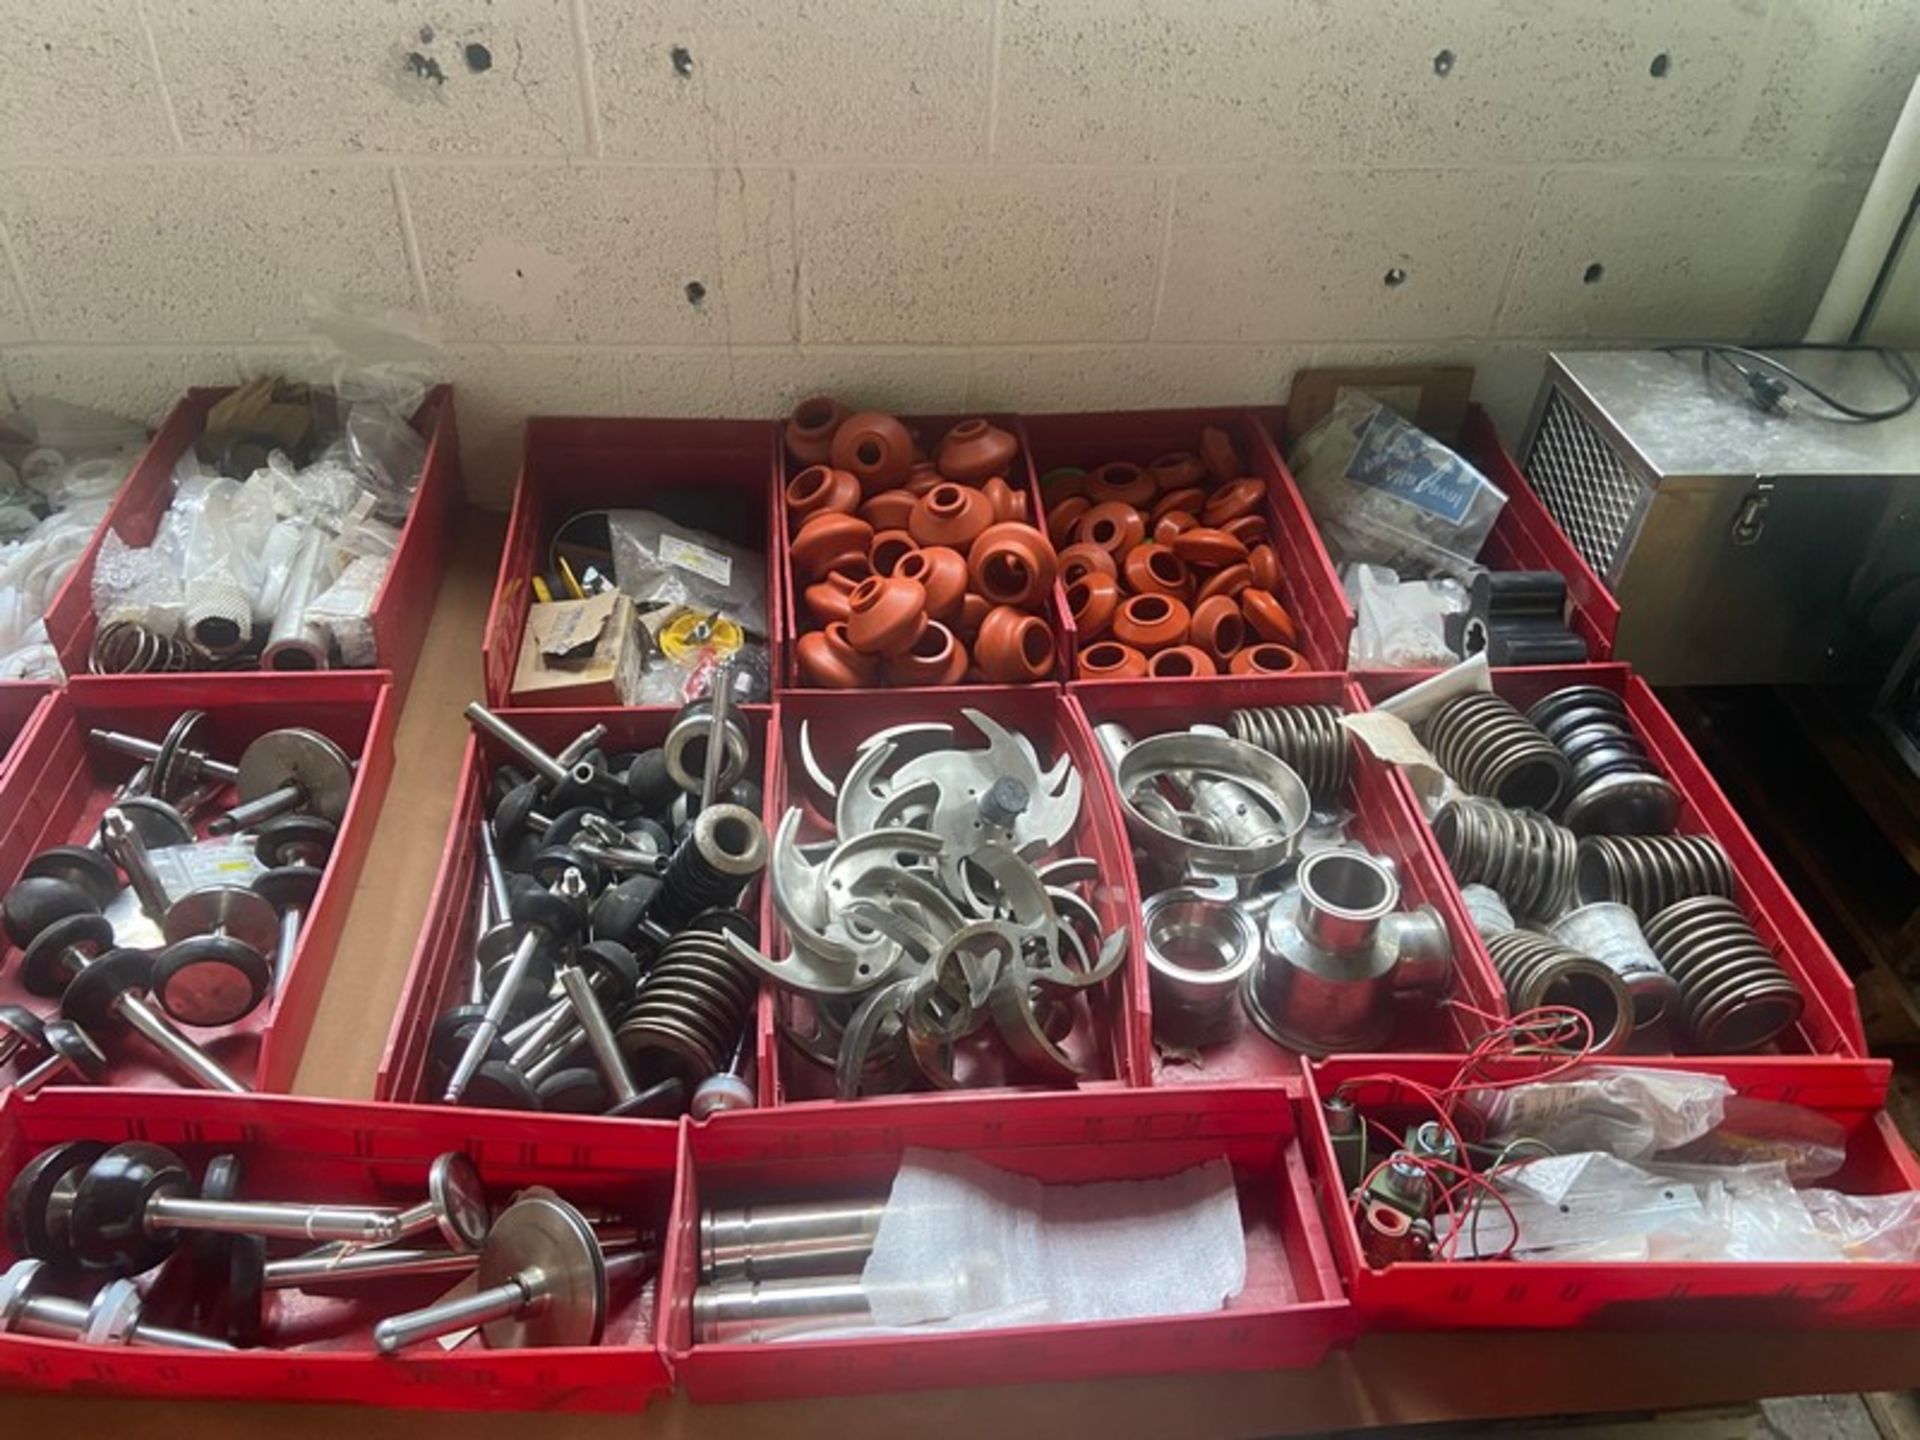 Large Assortment of NEW Parts with Parts Bins, Includes S/S Pump Parts, Air Valve Parts, Gaskets, - Image 8 of 9